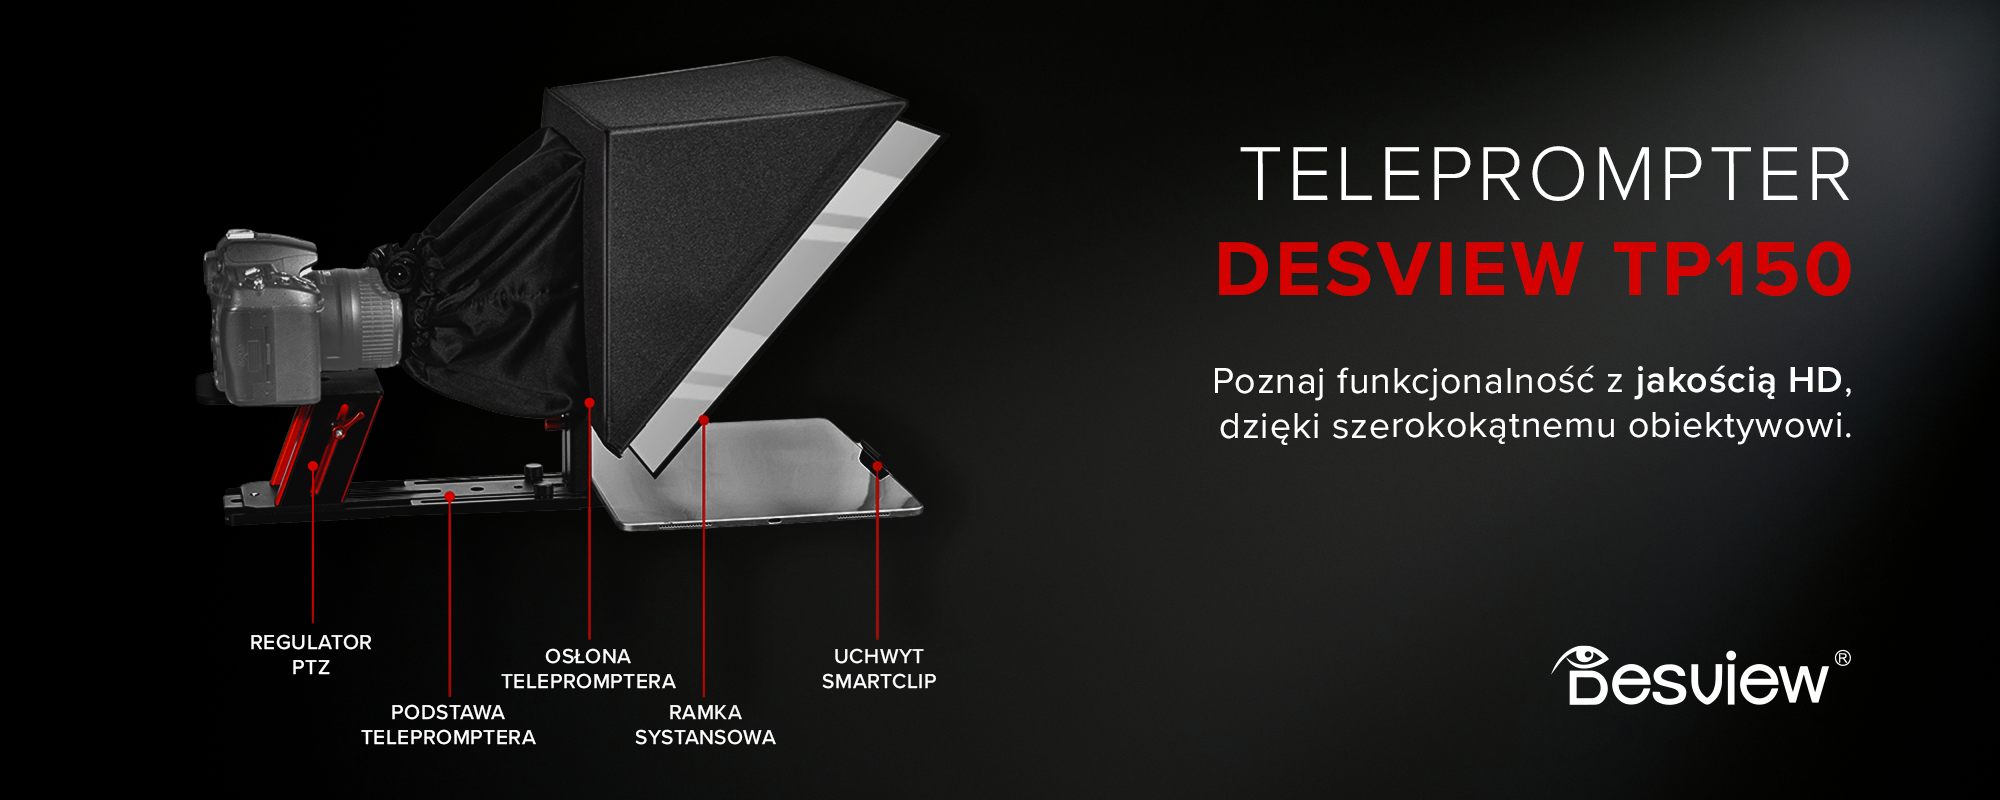 Teleprompter Desview TP150